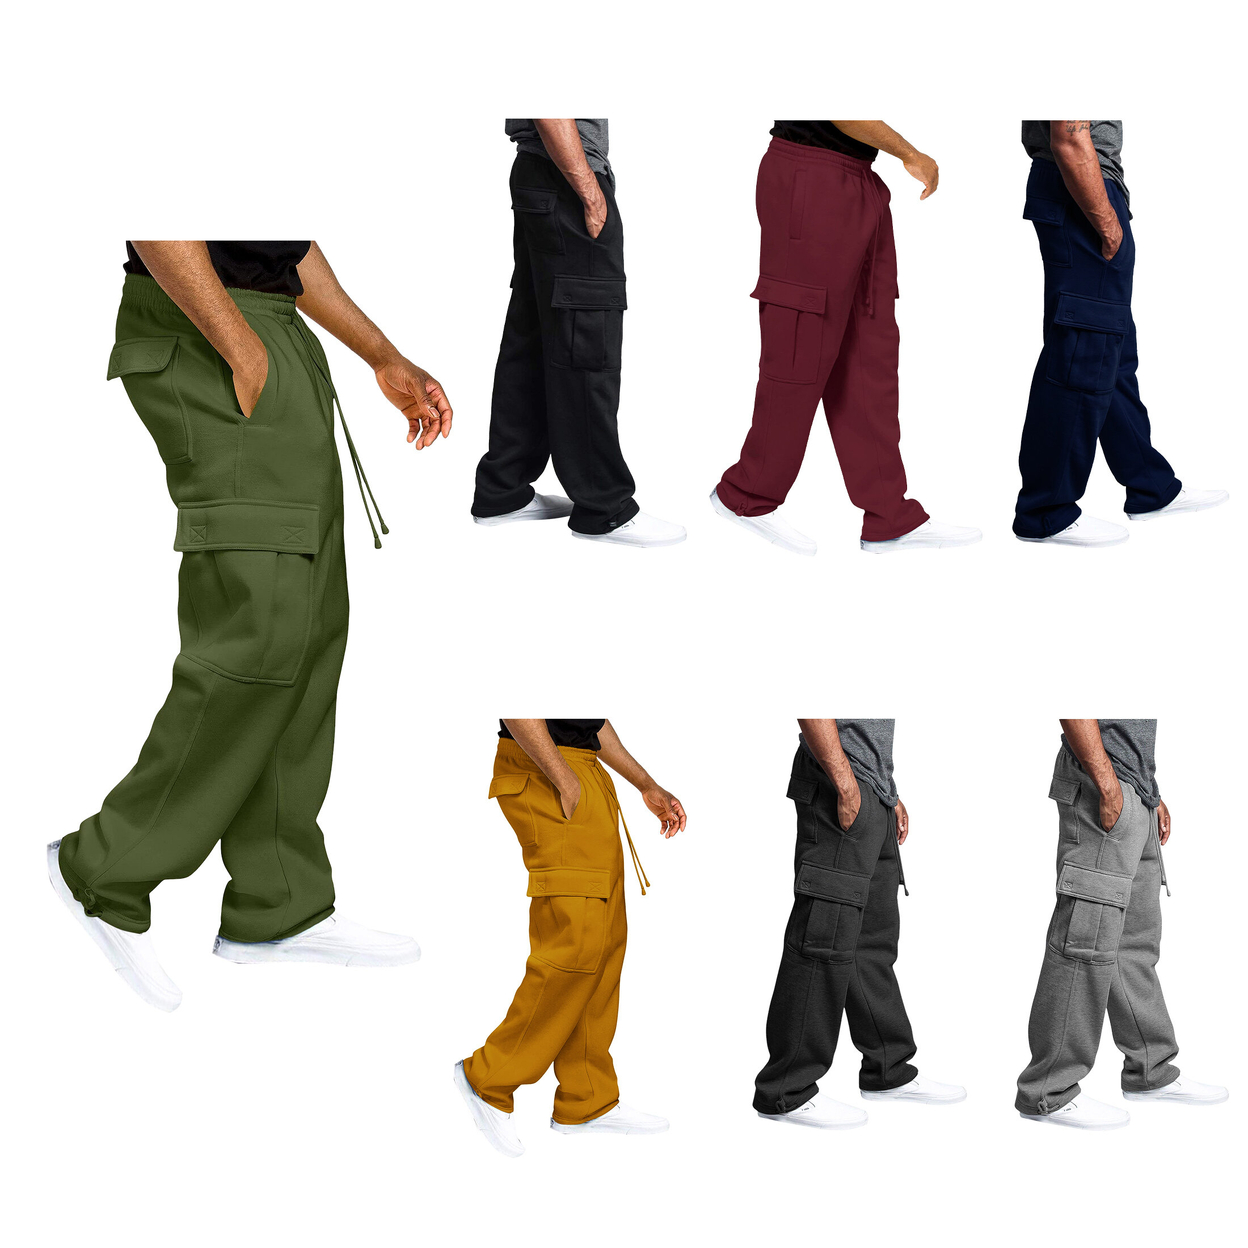 Men's Soft Casual Solid Fleece Lined Cargo Jogger Sweatpants With Pockets - Charcoal, Small